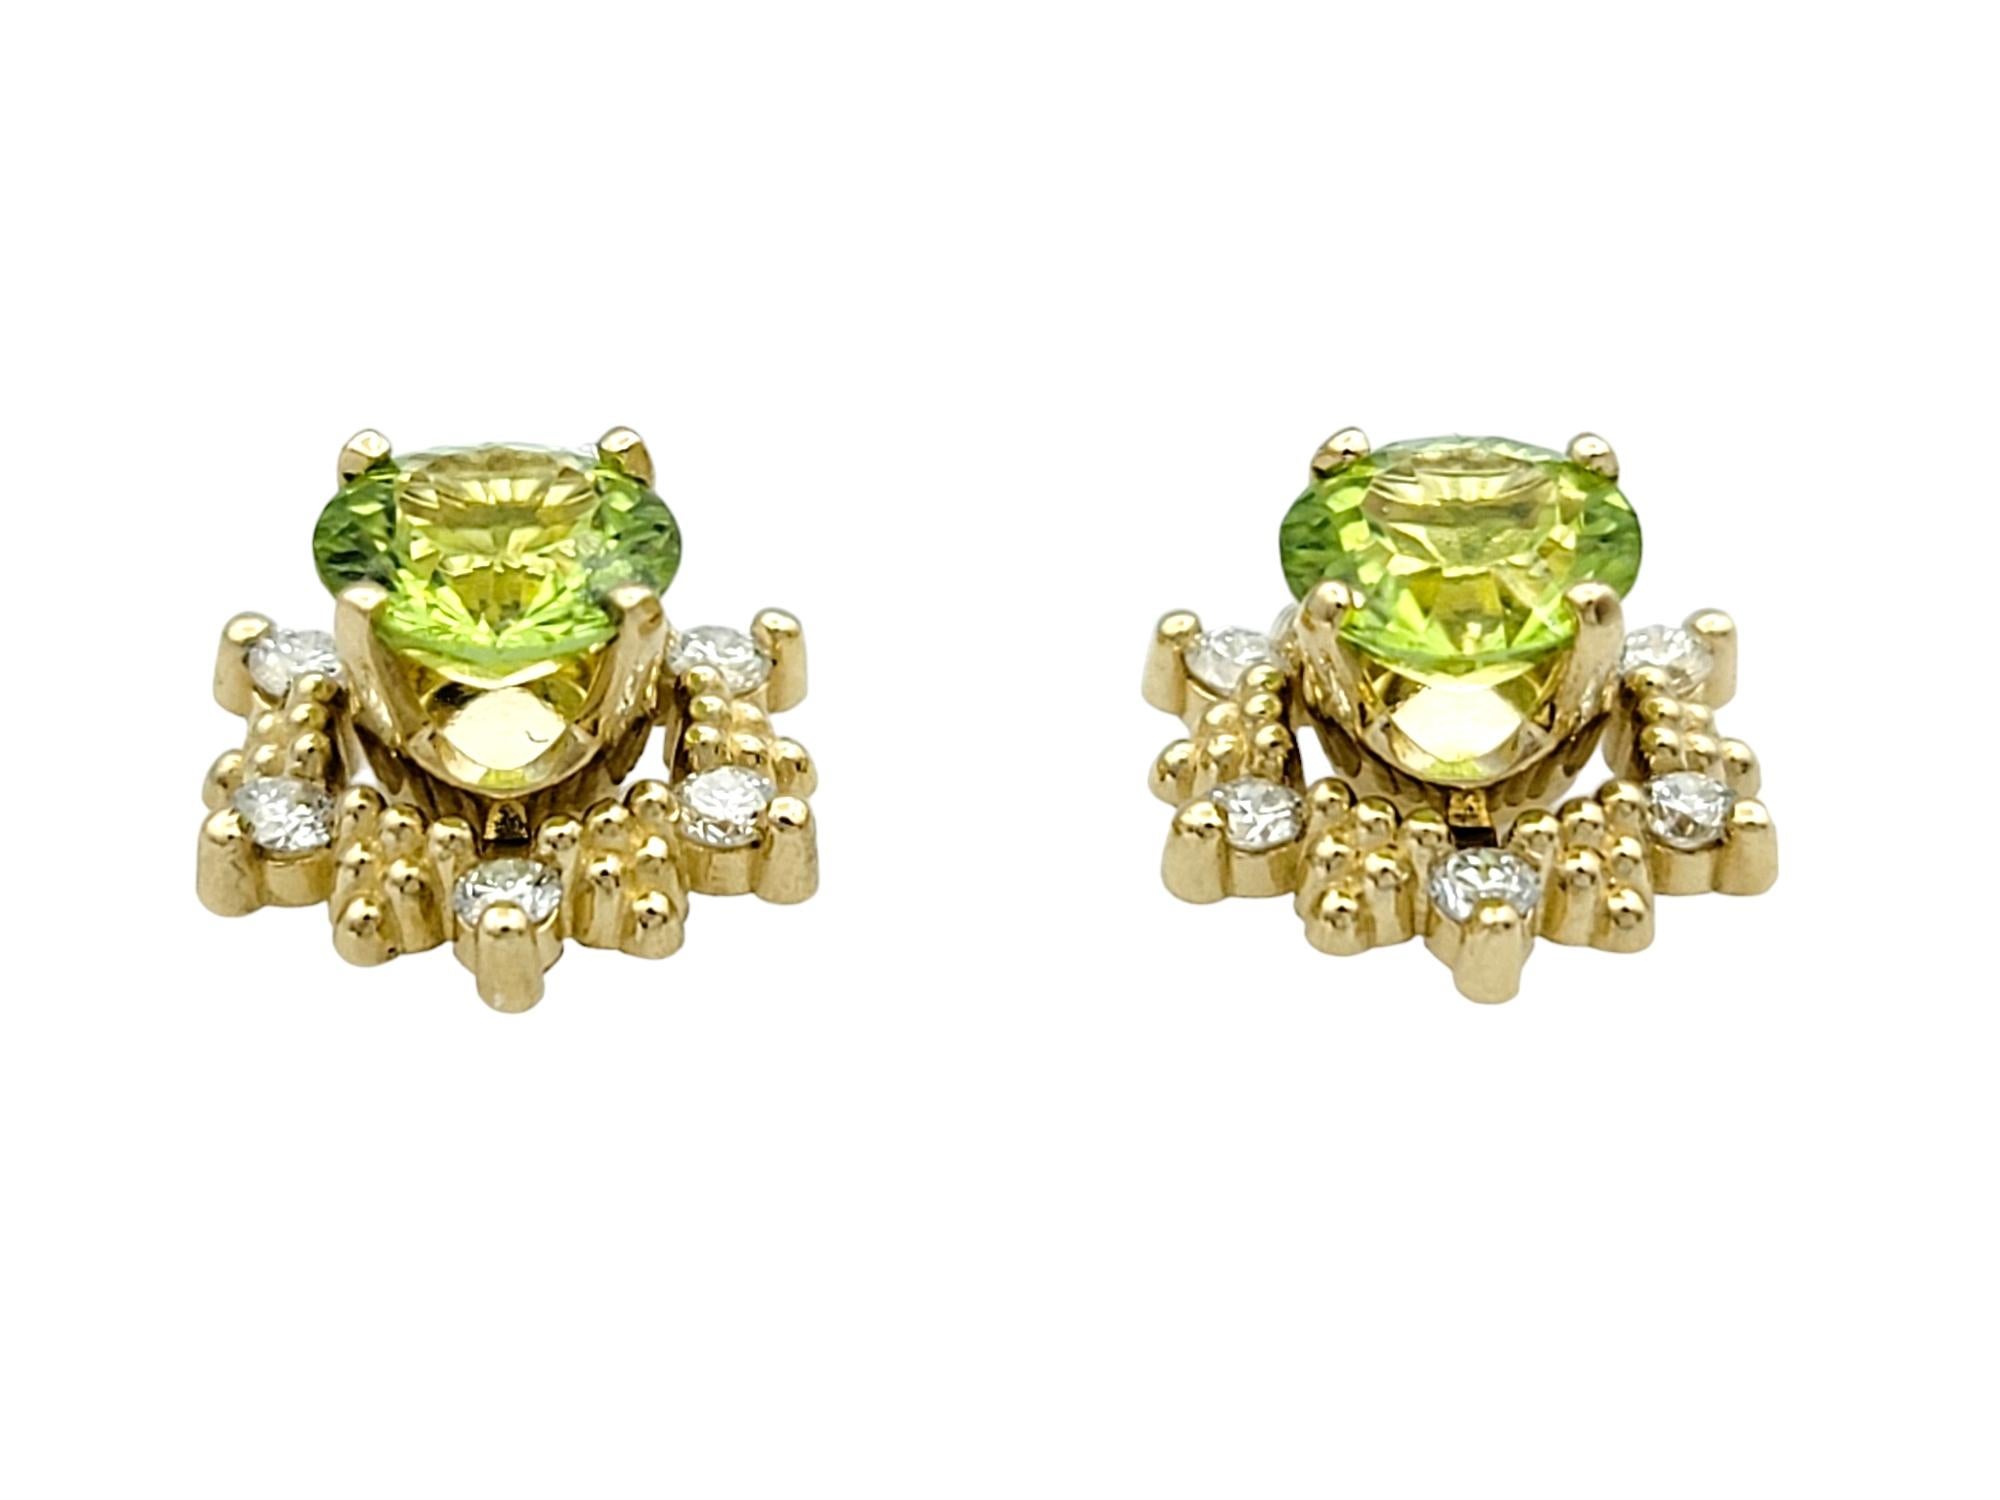 Round Peridot Stud Earrings with Diamond Halo Jackets in 14 Karat Yellow Gold In Excellent Condition For Sale In Scottsdale, AZ